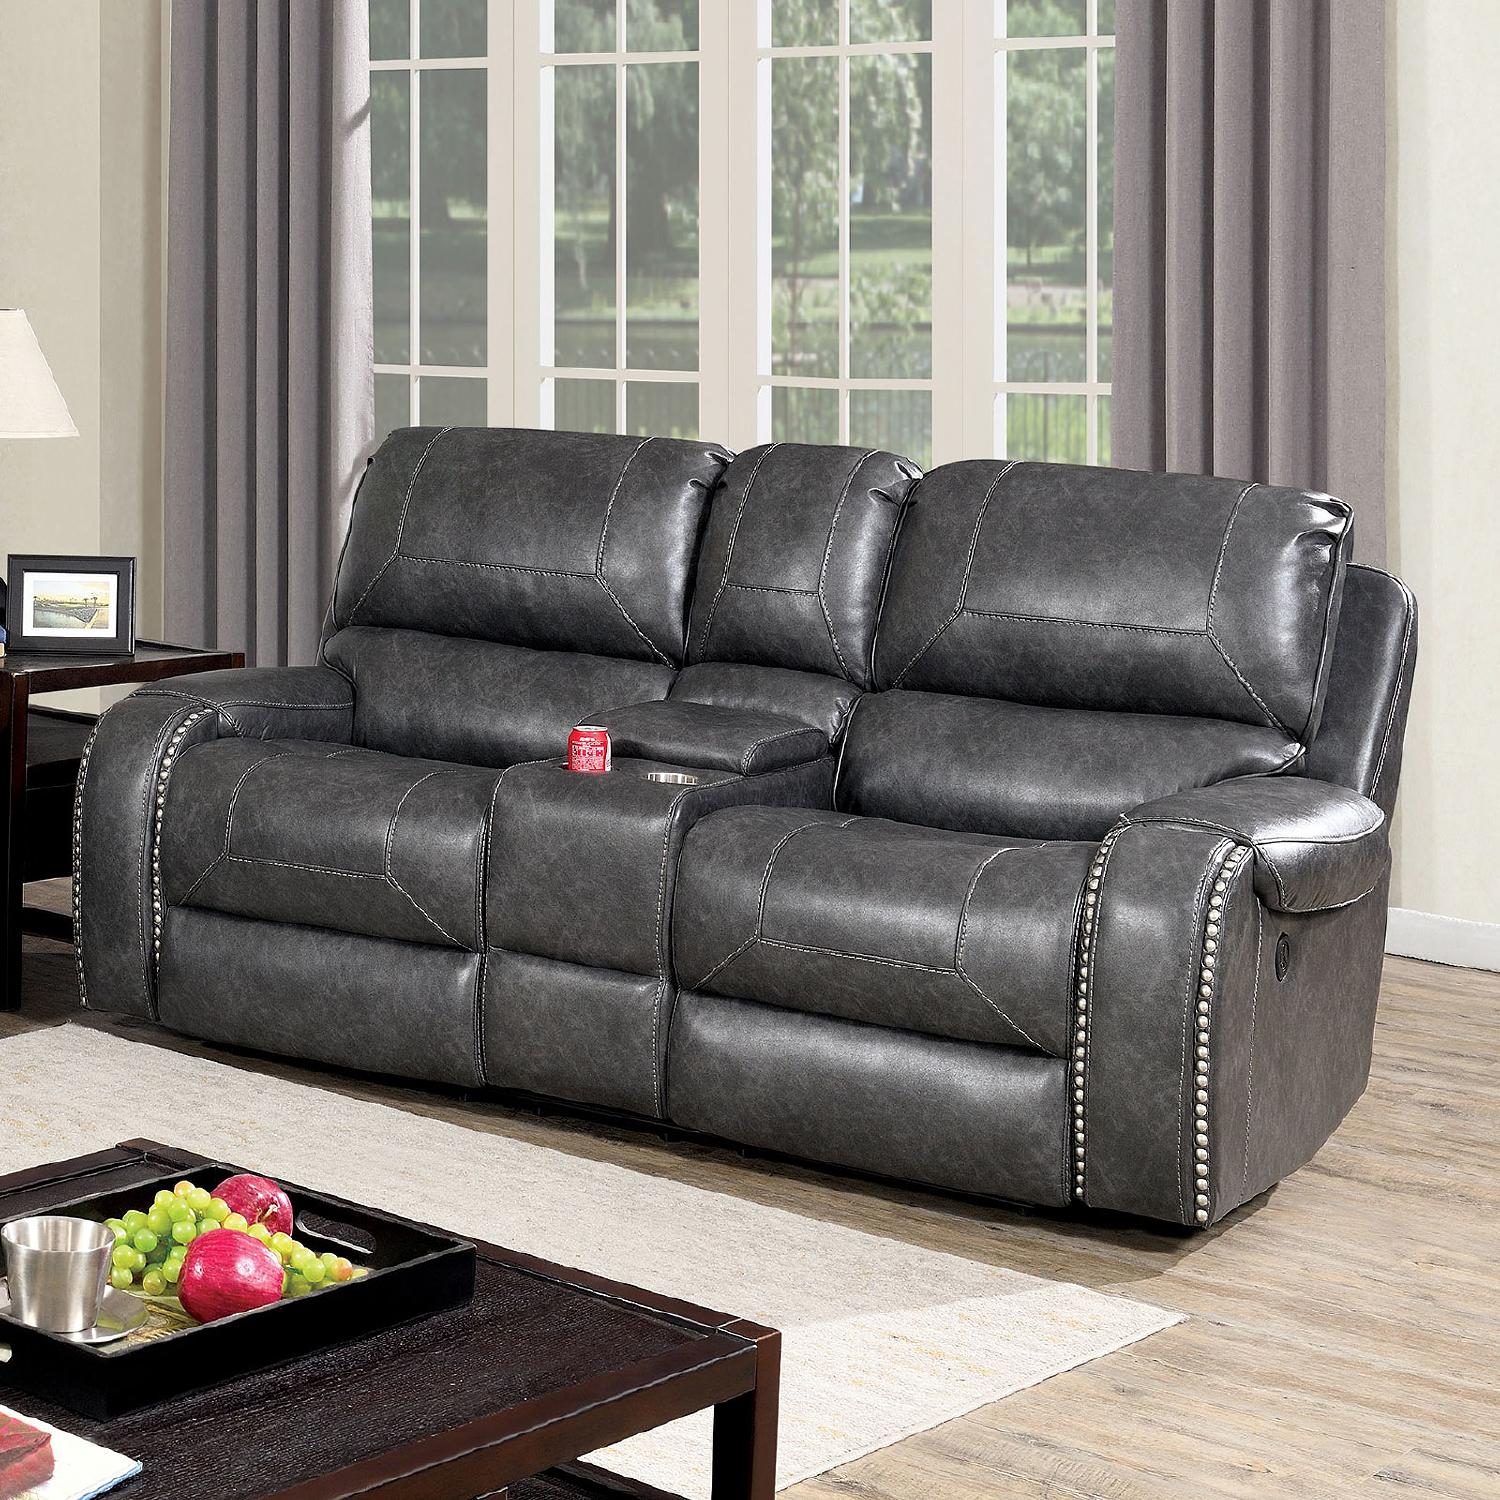 Transitional Recliner Loveseat CM6950GY-LV Walter CM6950GY-LV in Gray Leatherette